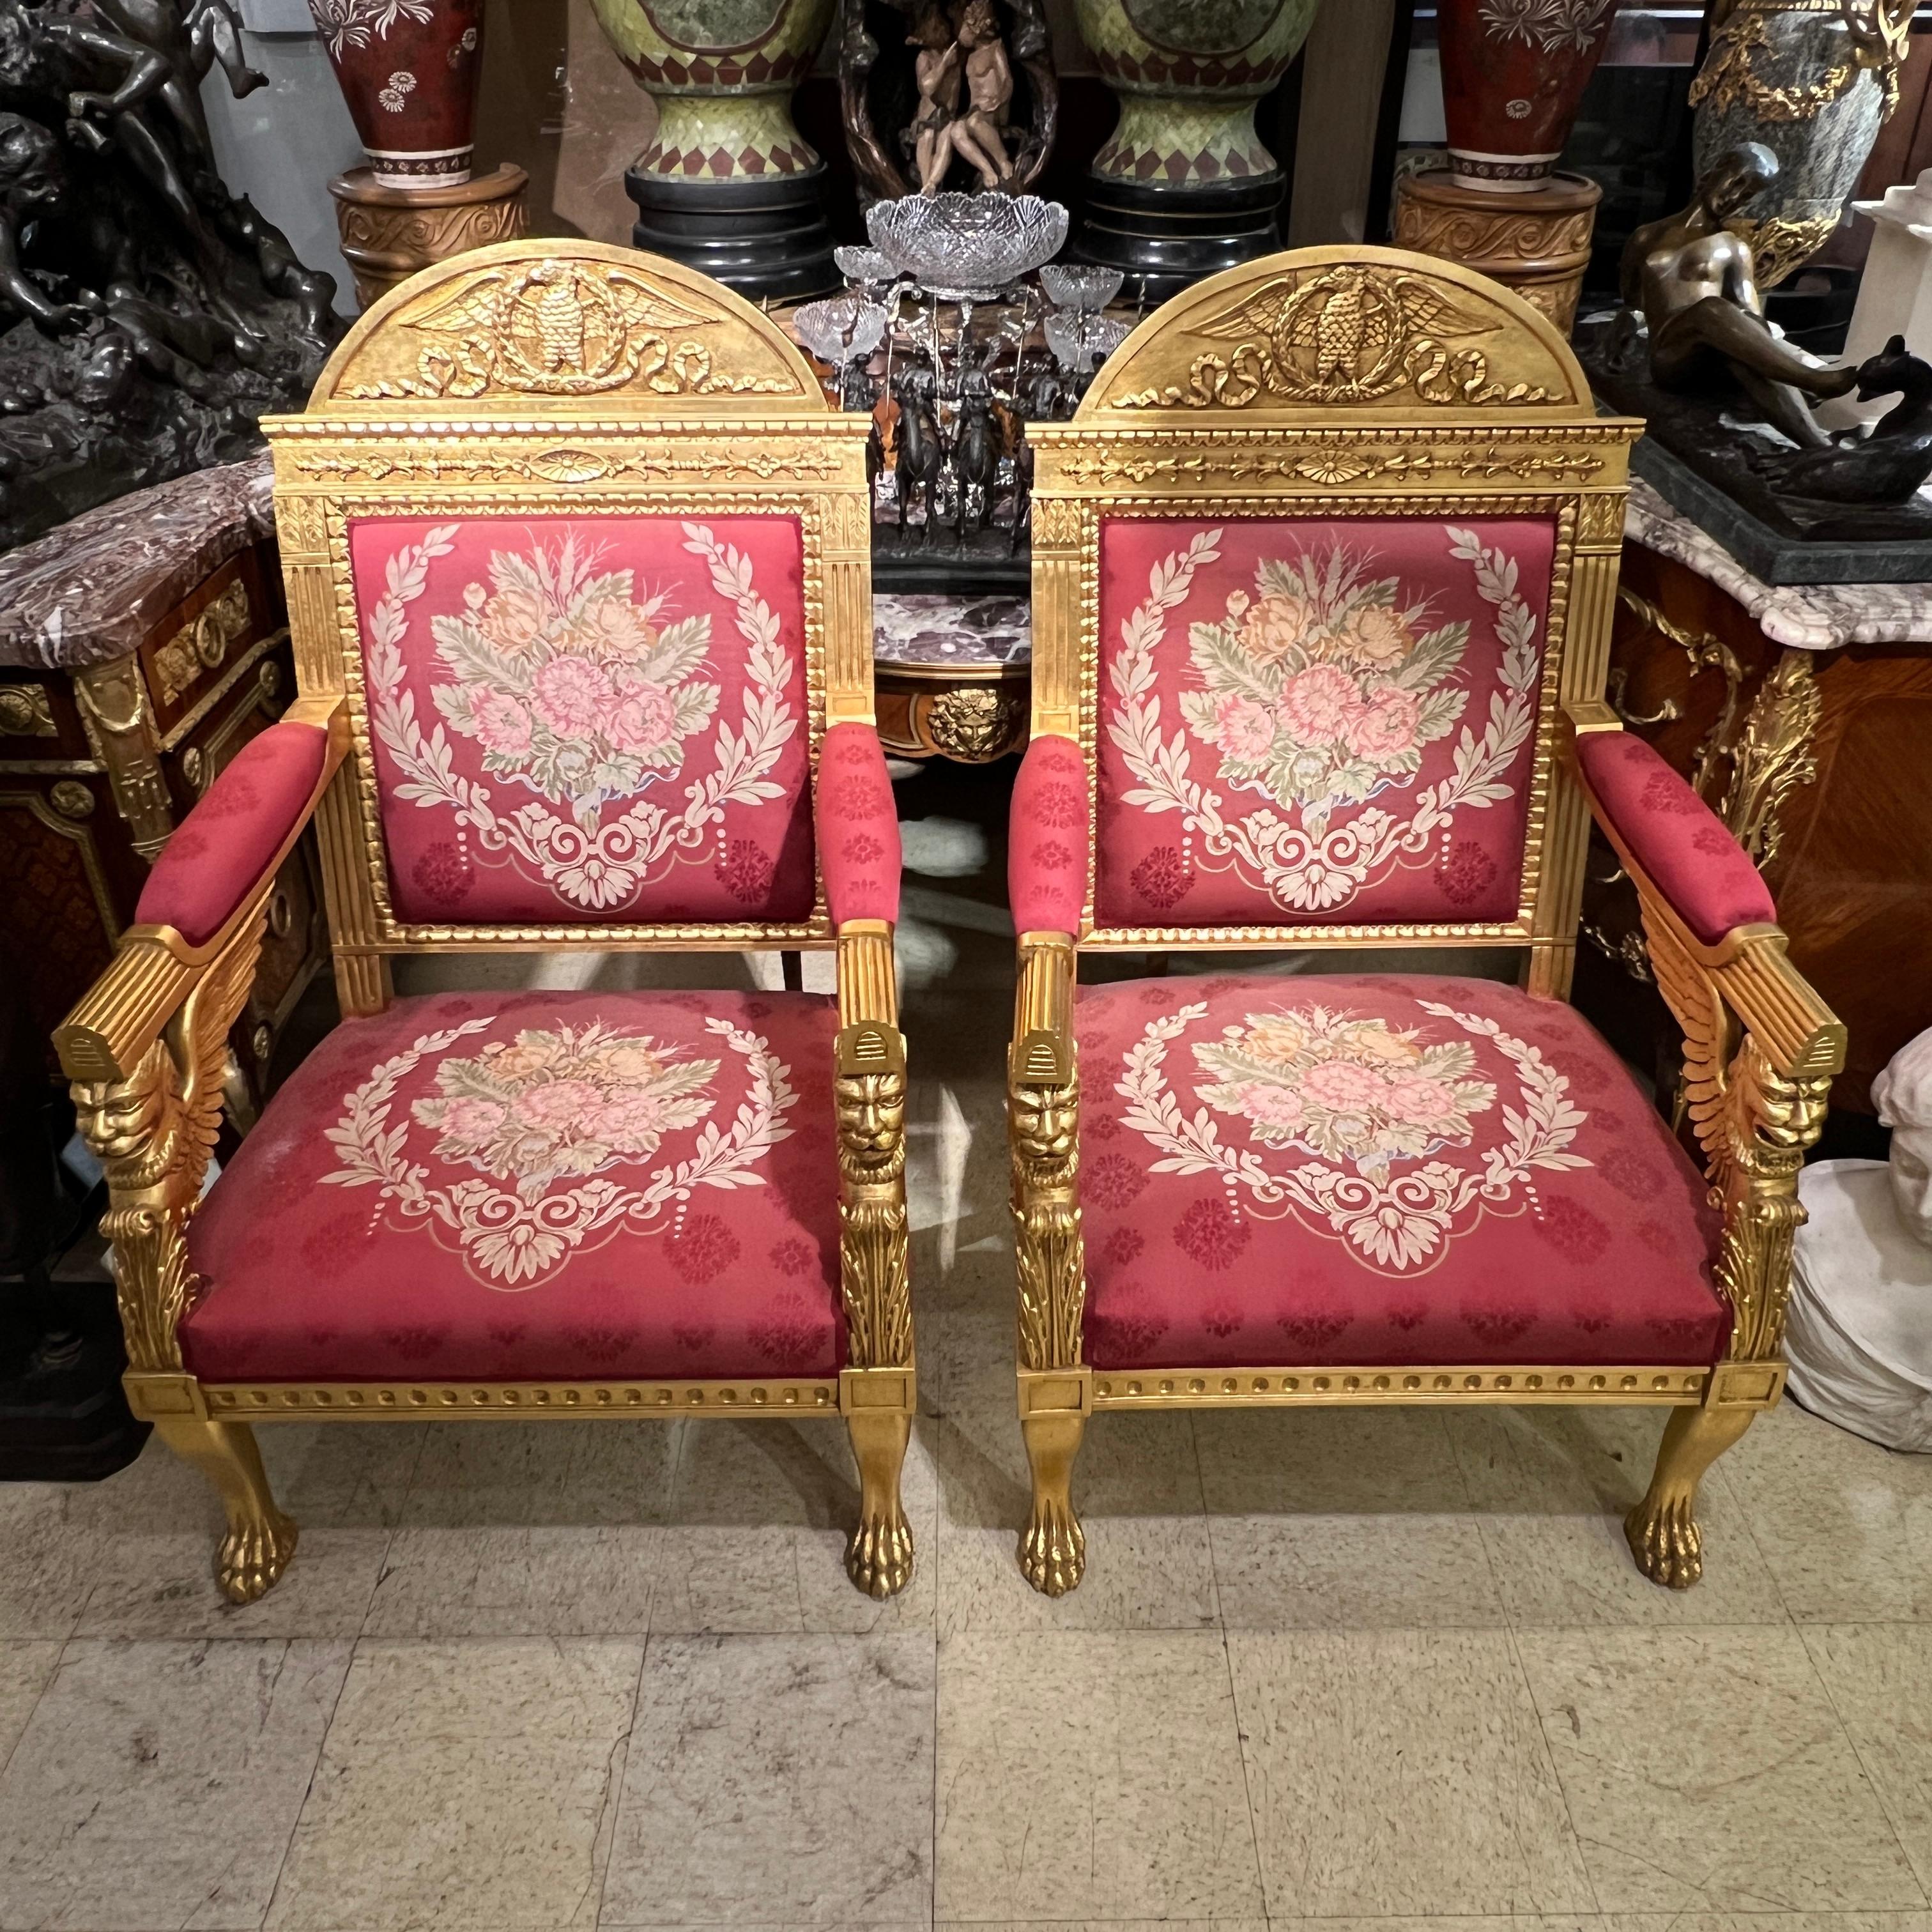 Pair of vintage (20th century) hand-carved giltwood armchairs in the French  Empire style with lovely red upholstered seats, seatbacks and armrests with petit point embroidered floral decorations.